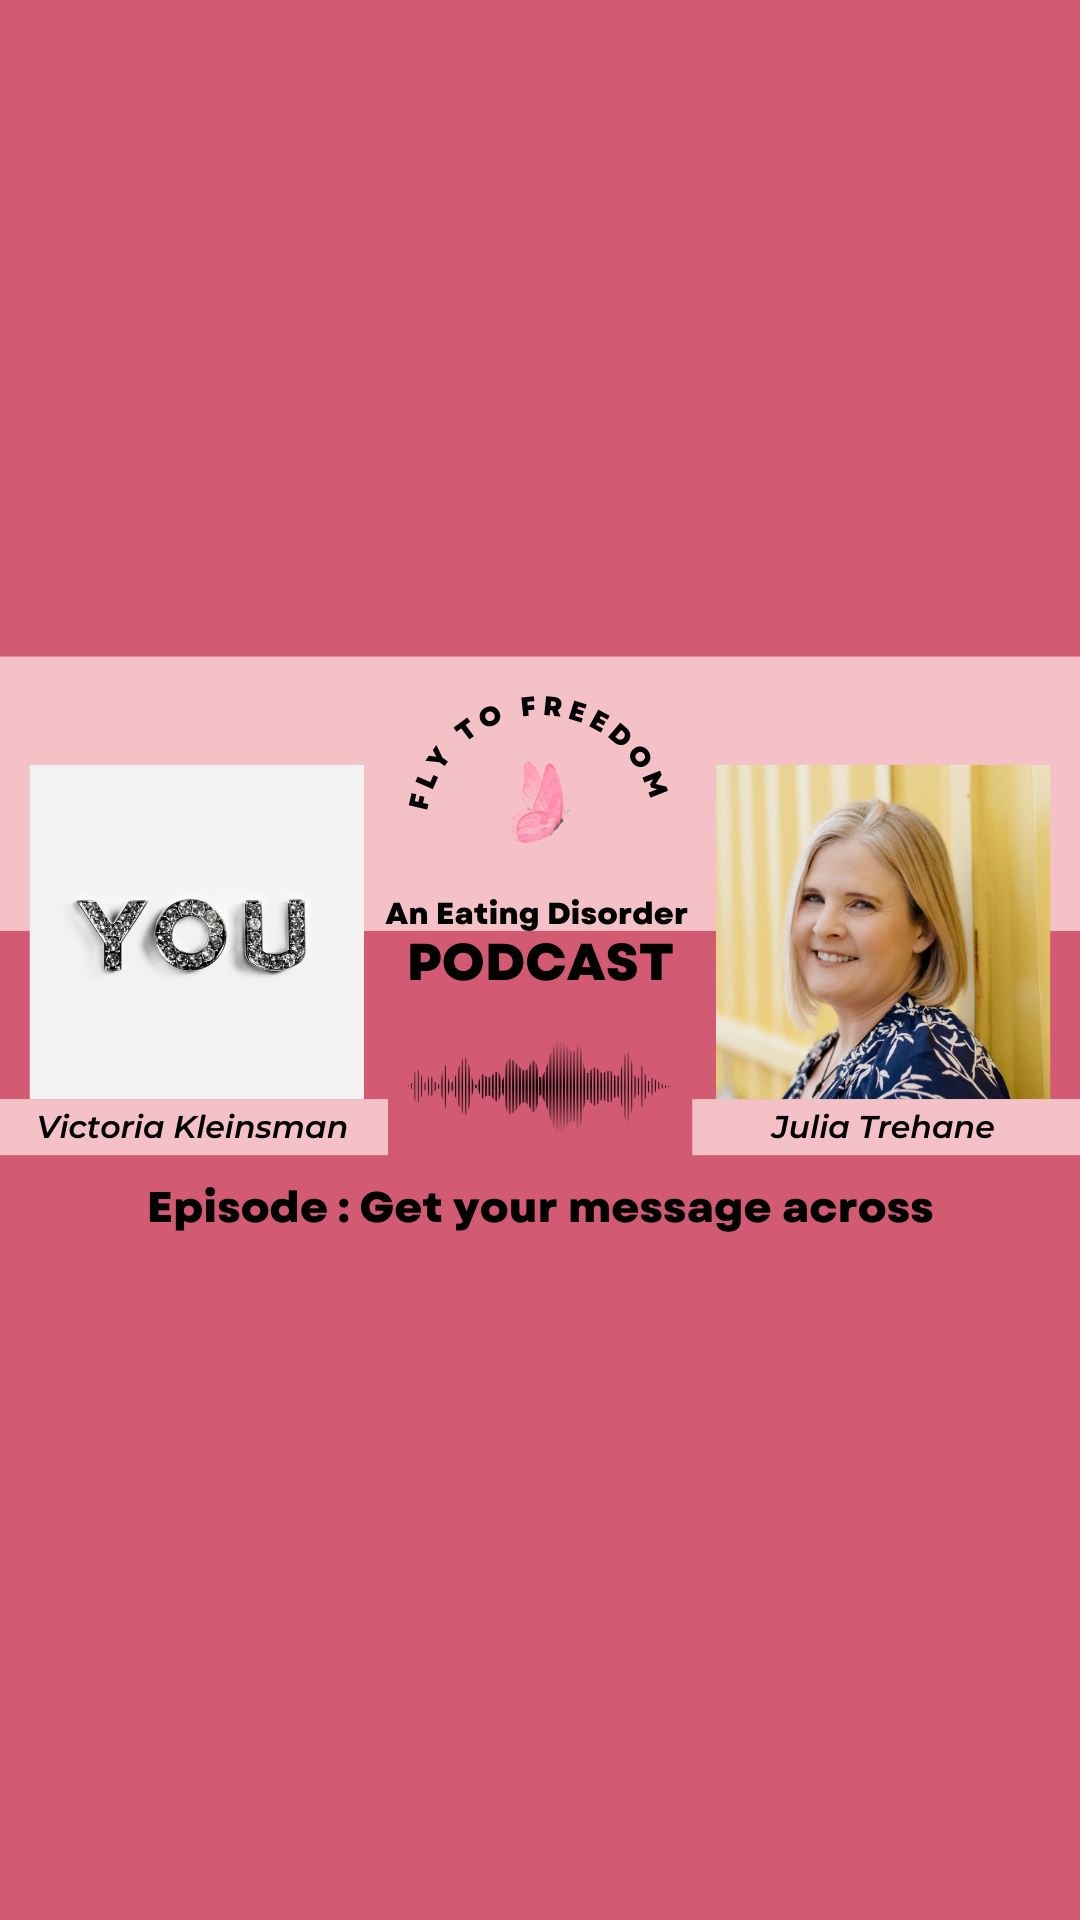 be  a guest on my podcast for eating disorder, anorexia, bulimia, body confidence recovery